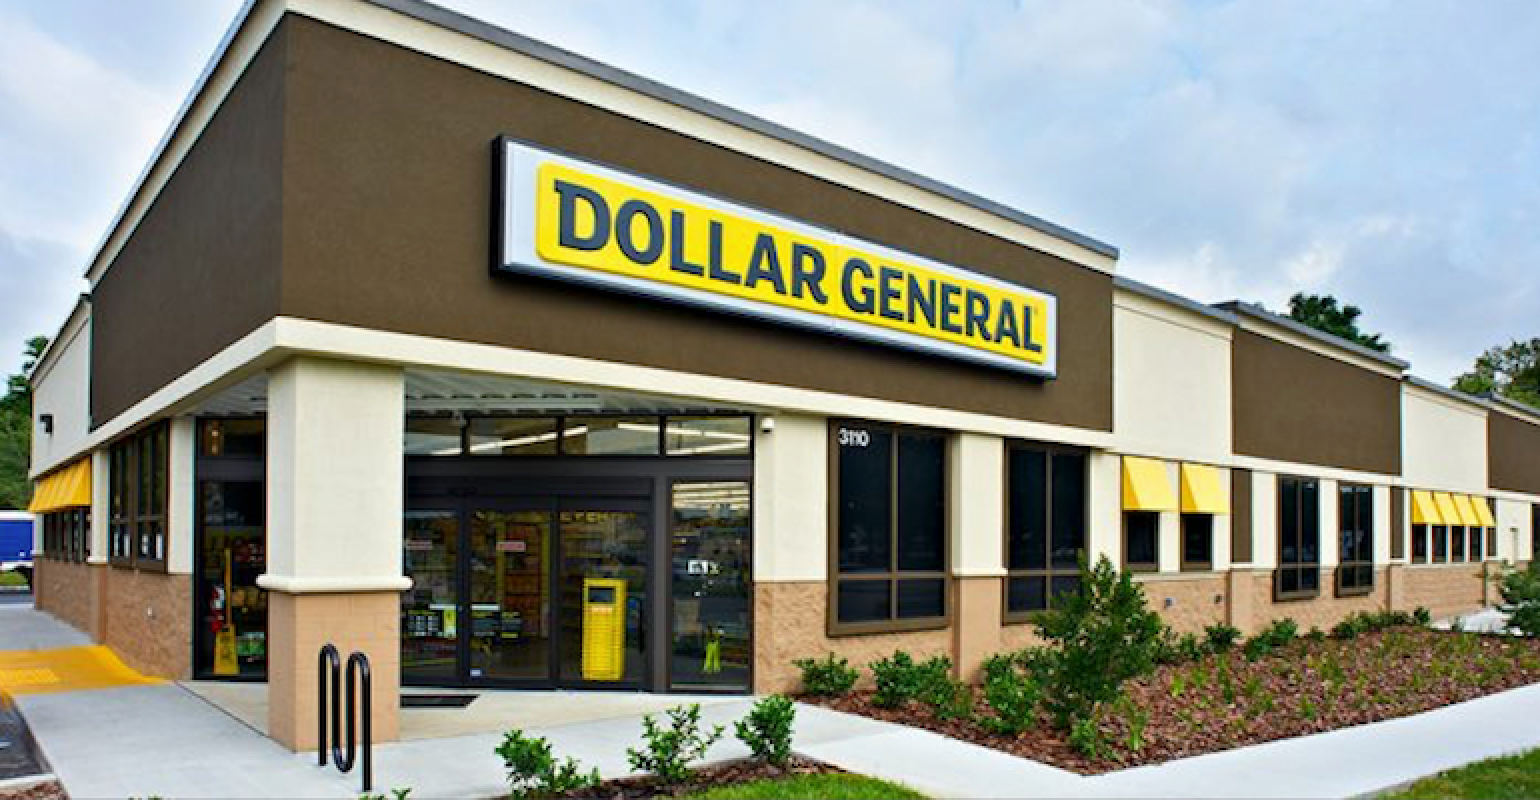 Human Resources for Dollar General: What you need to know